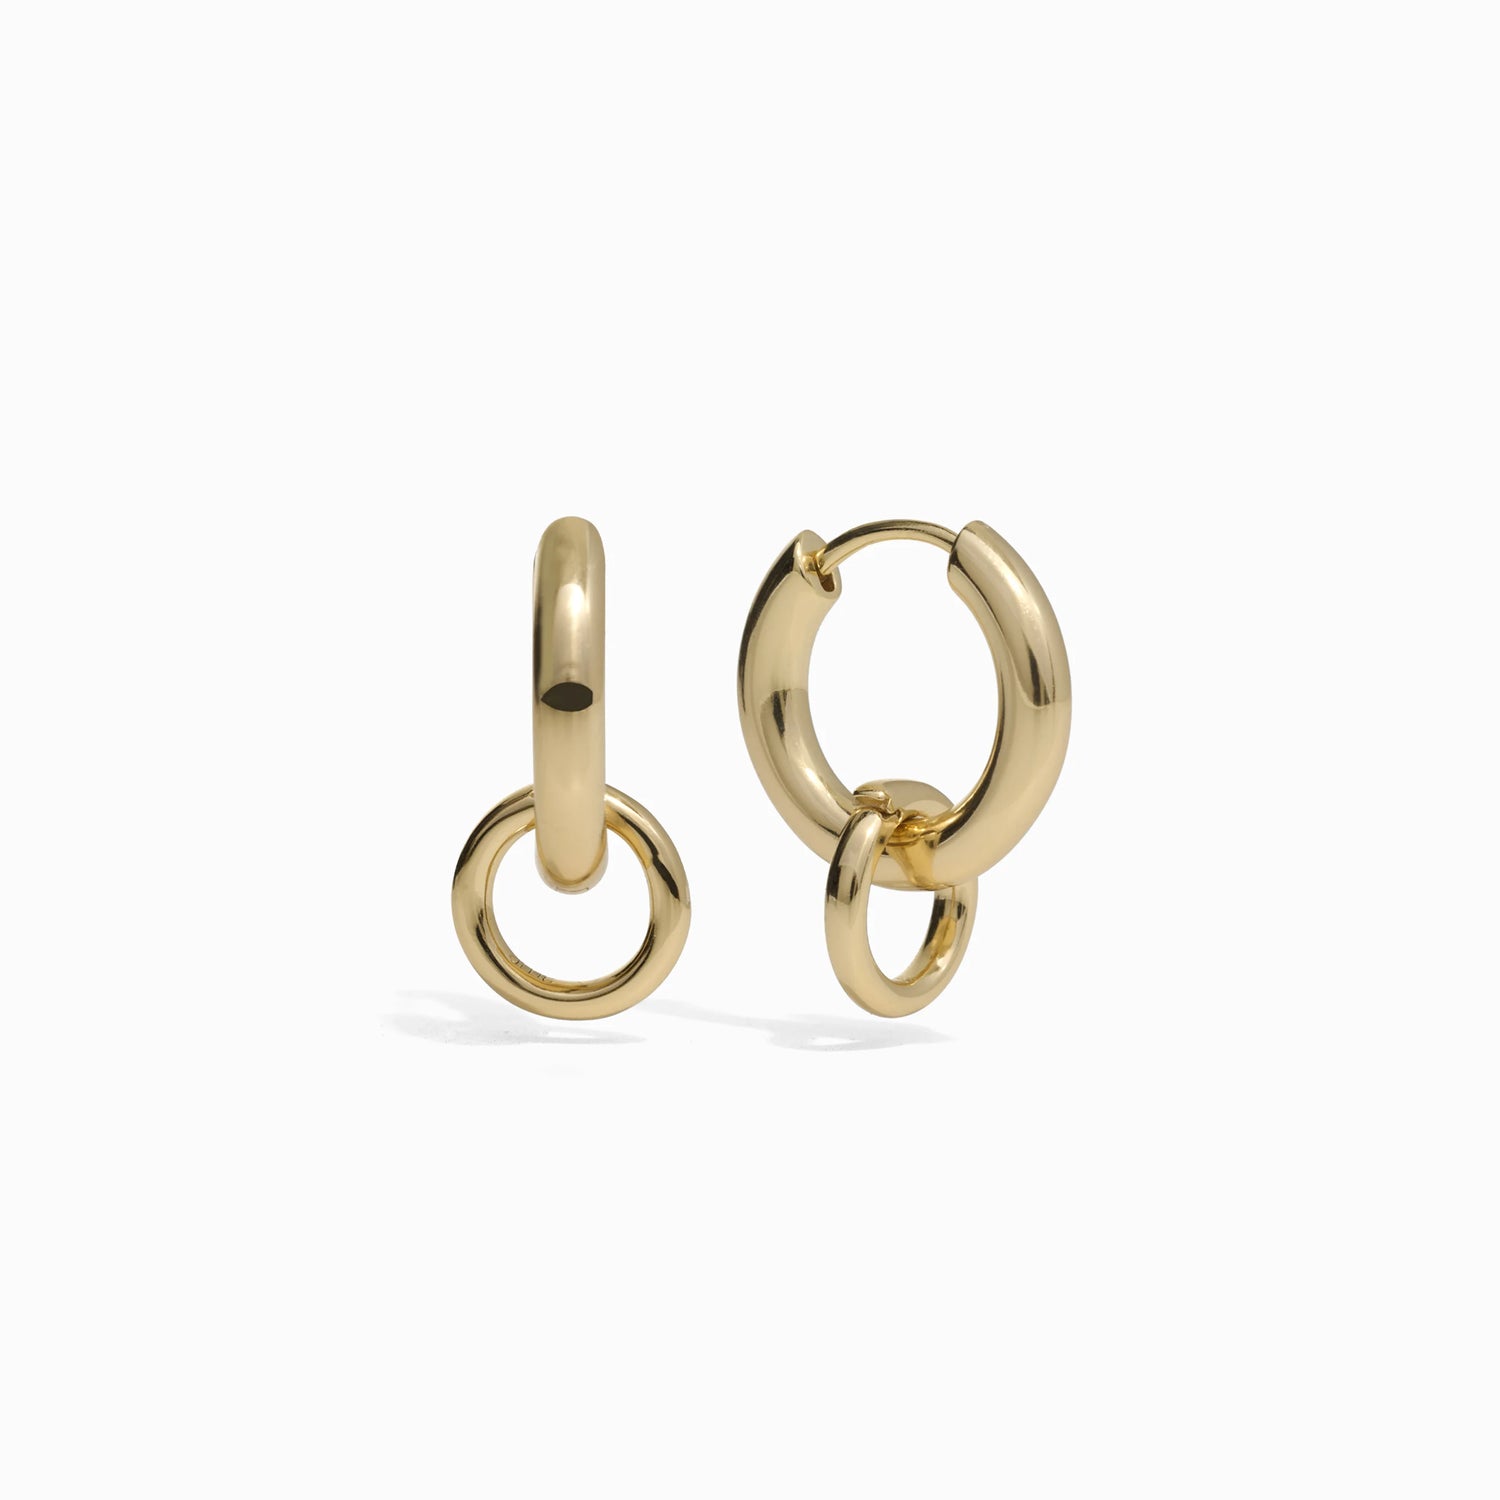 Product image of Pair of The Collector Earring in gold vermeil